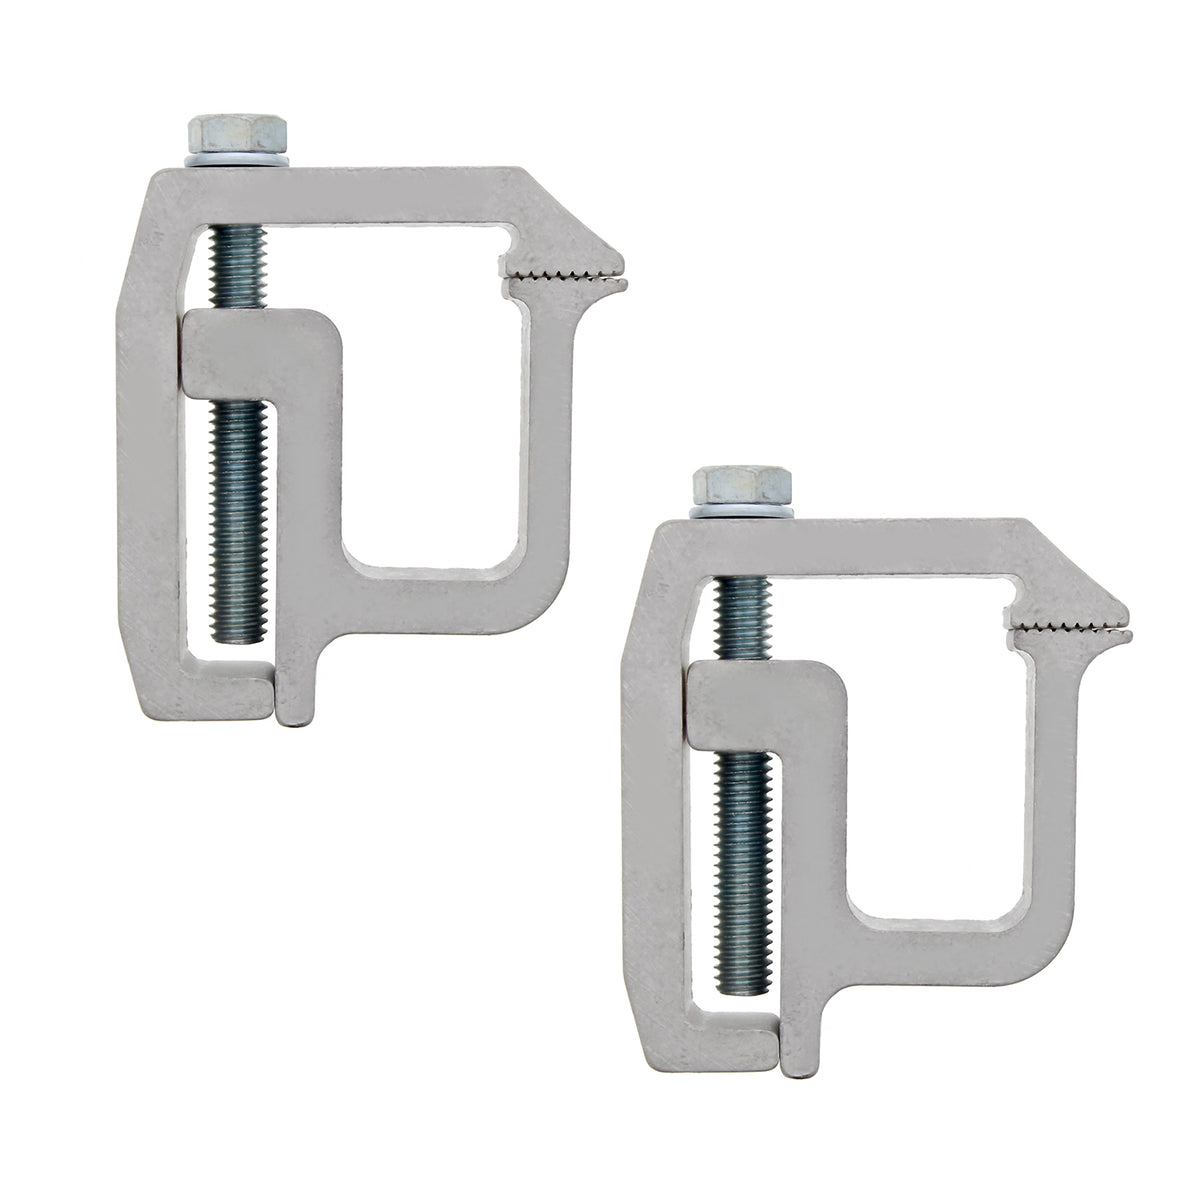 Truck Topper Clamps - 2 Pack Canopy and Truck Cap Mounting Clamps